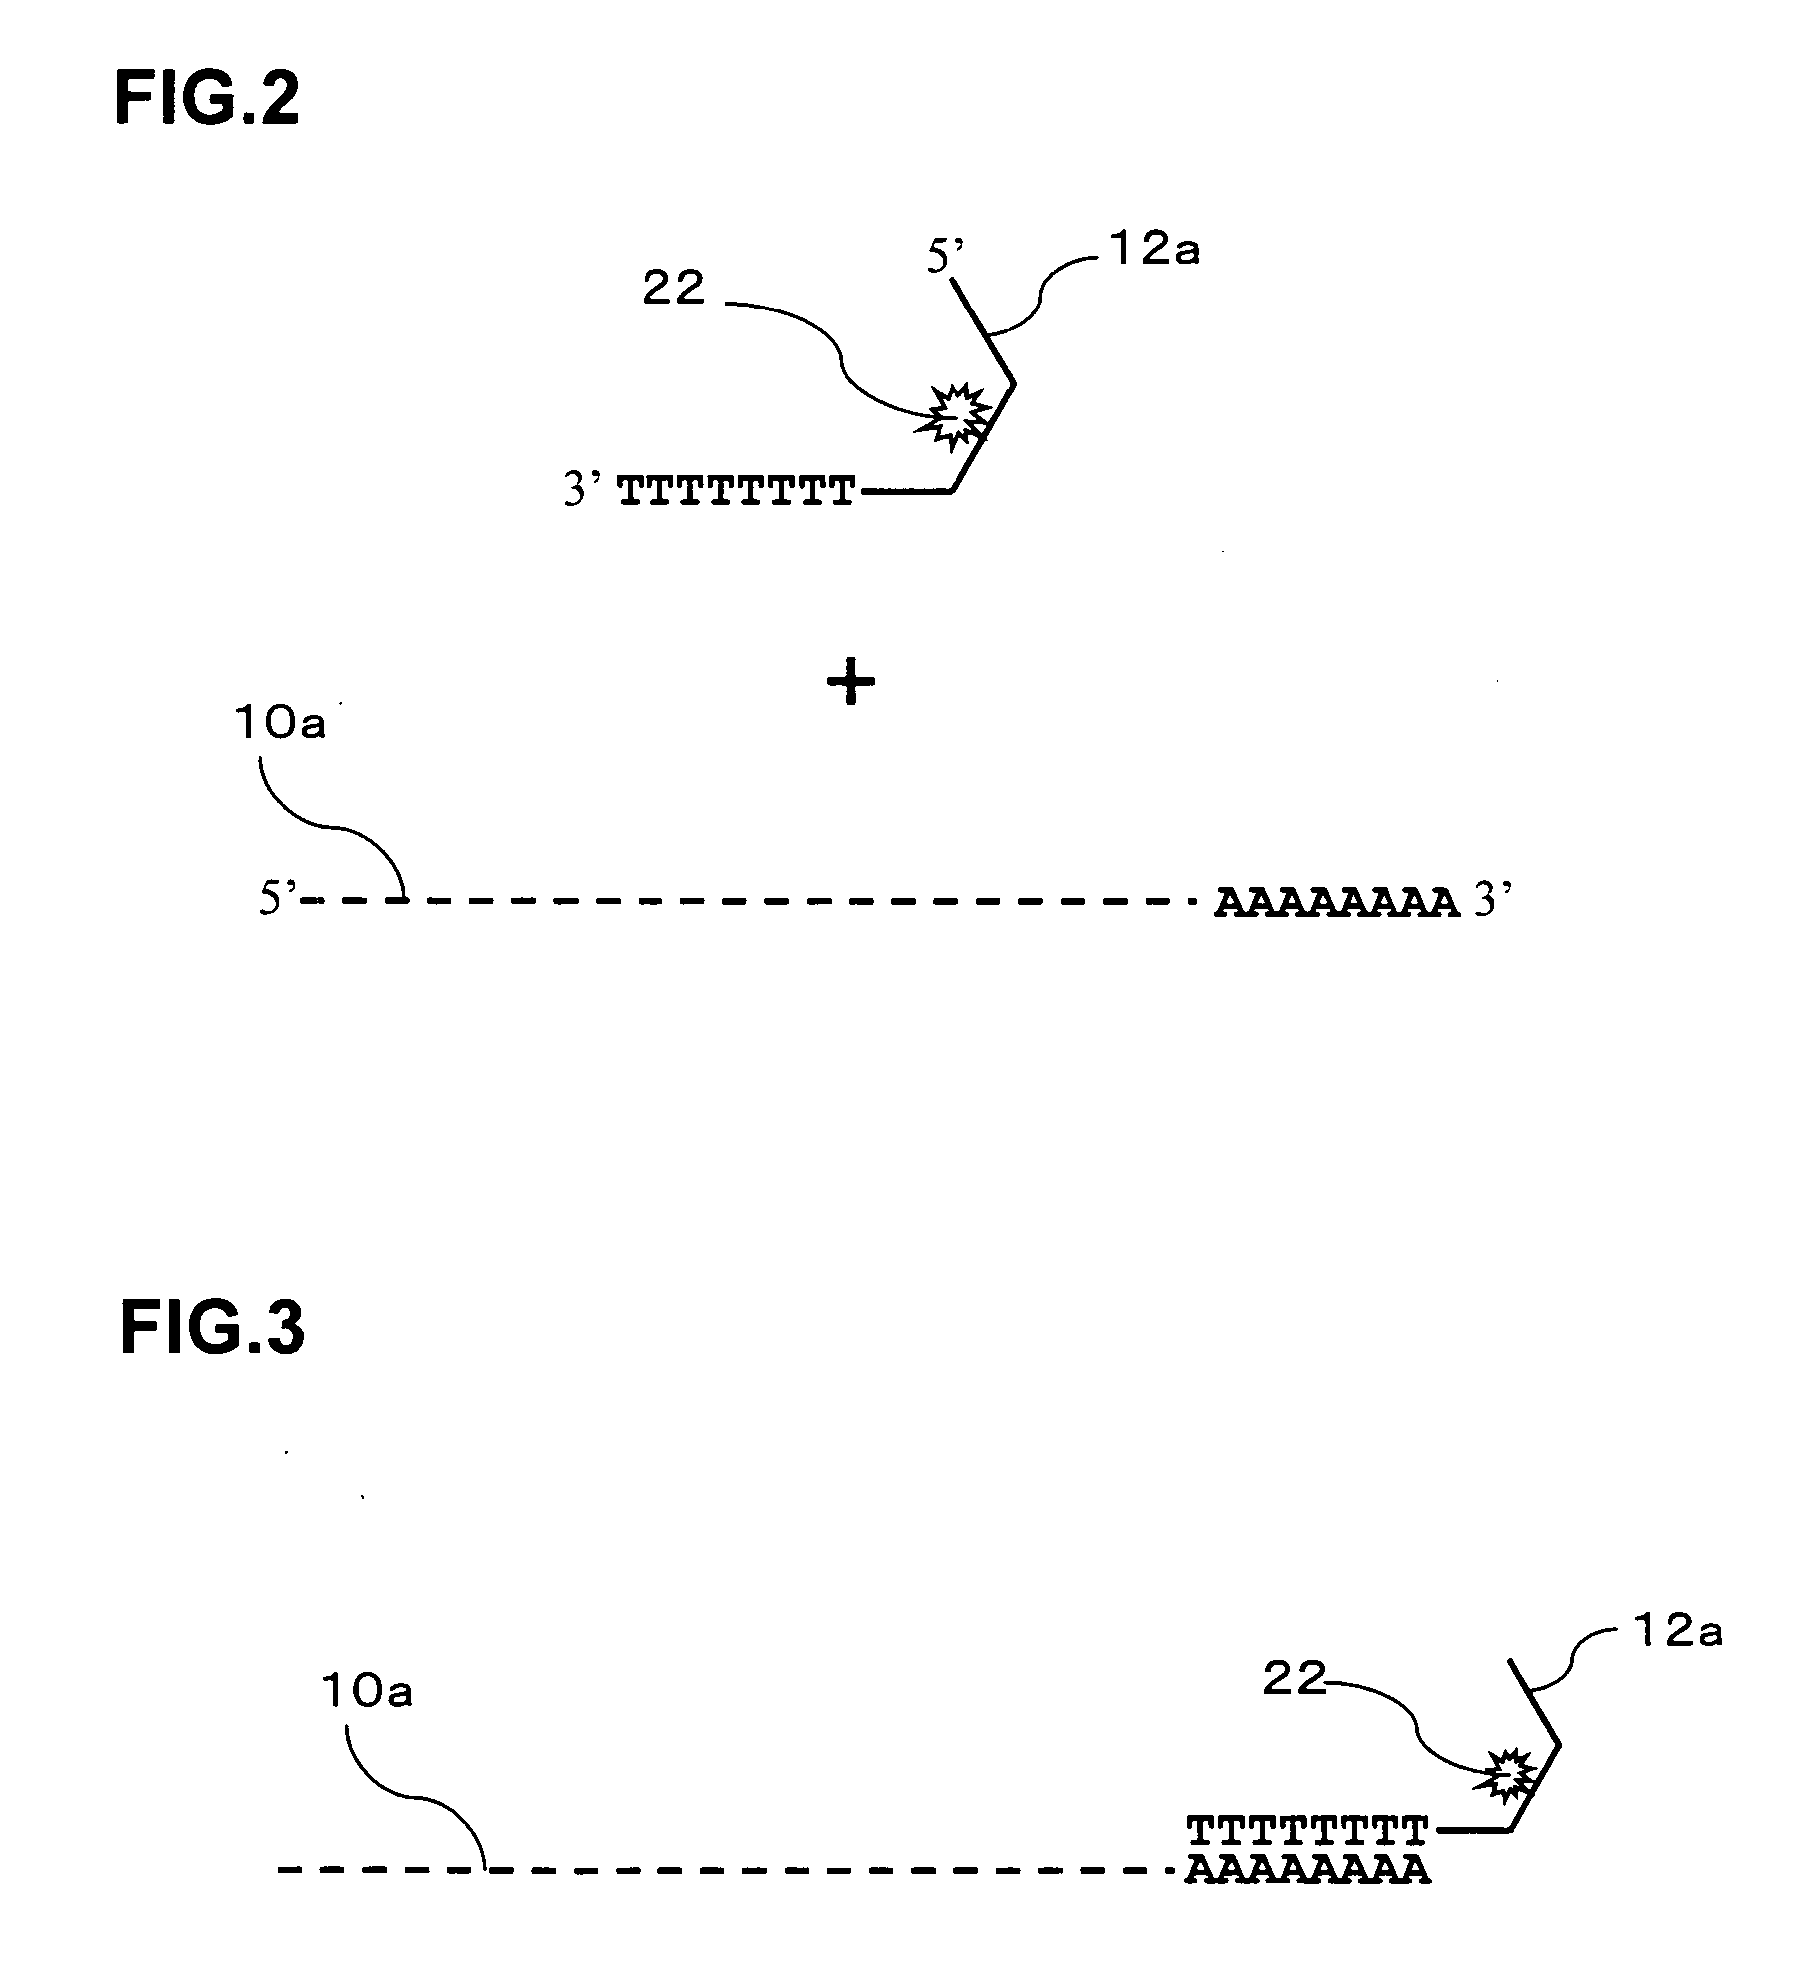 Signal amplification method for detecting expressed gene